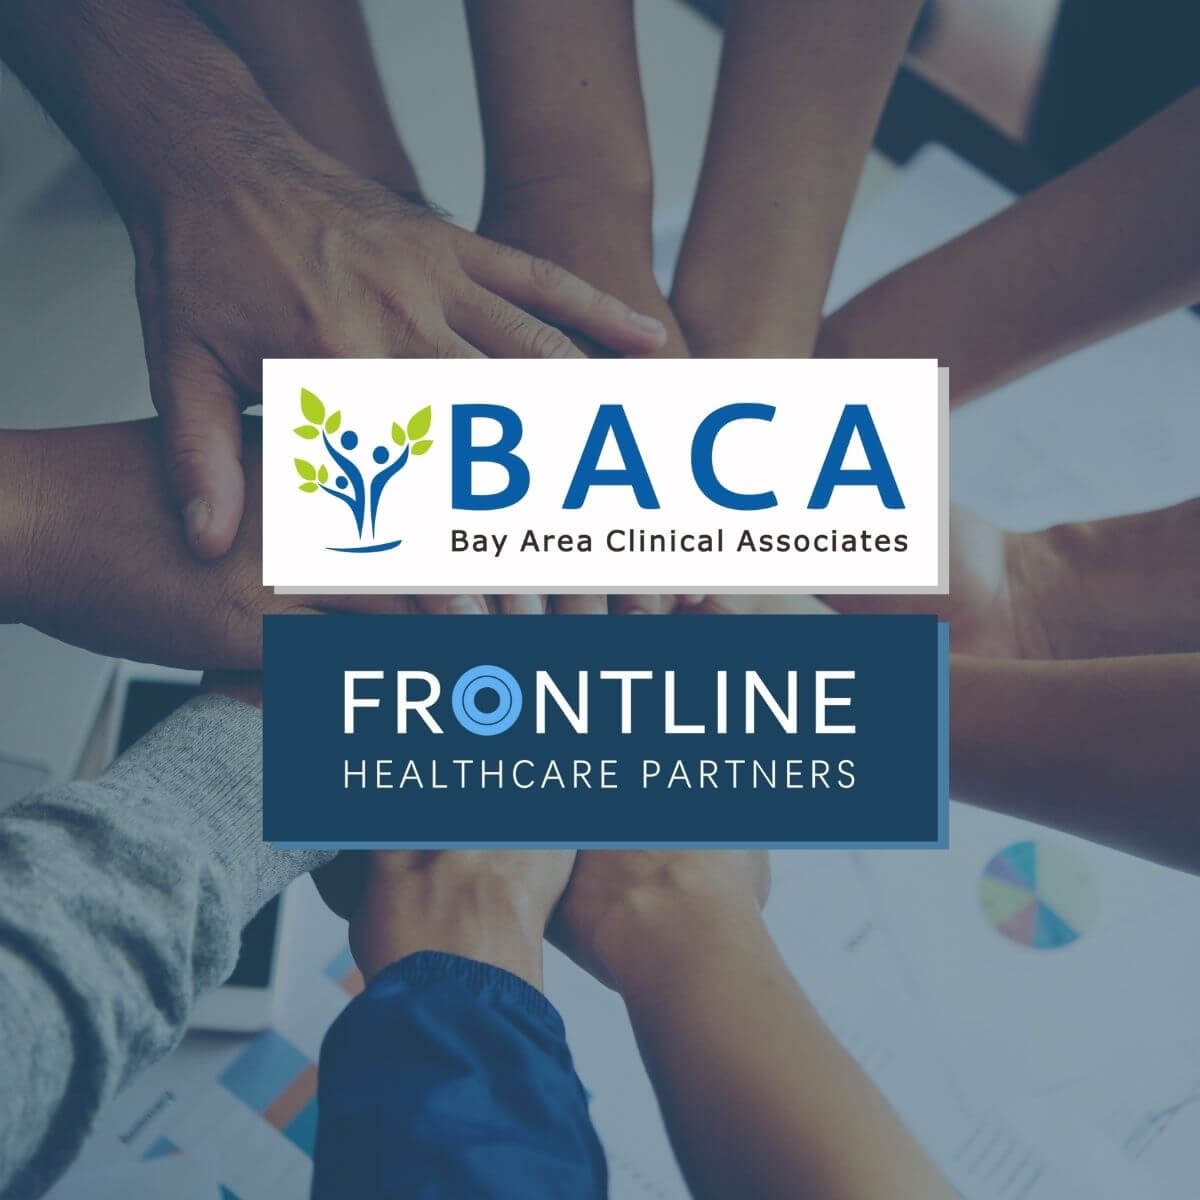 BACA Joins Forces with Frontline Healthcare Partners to Address the Youth Mental Health Crisis in America